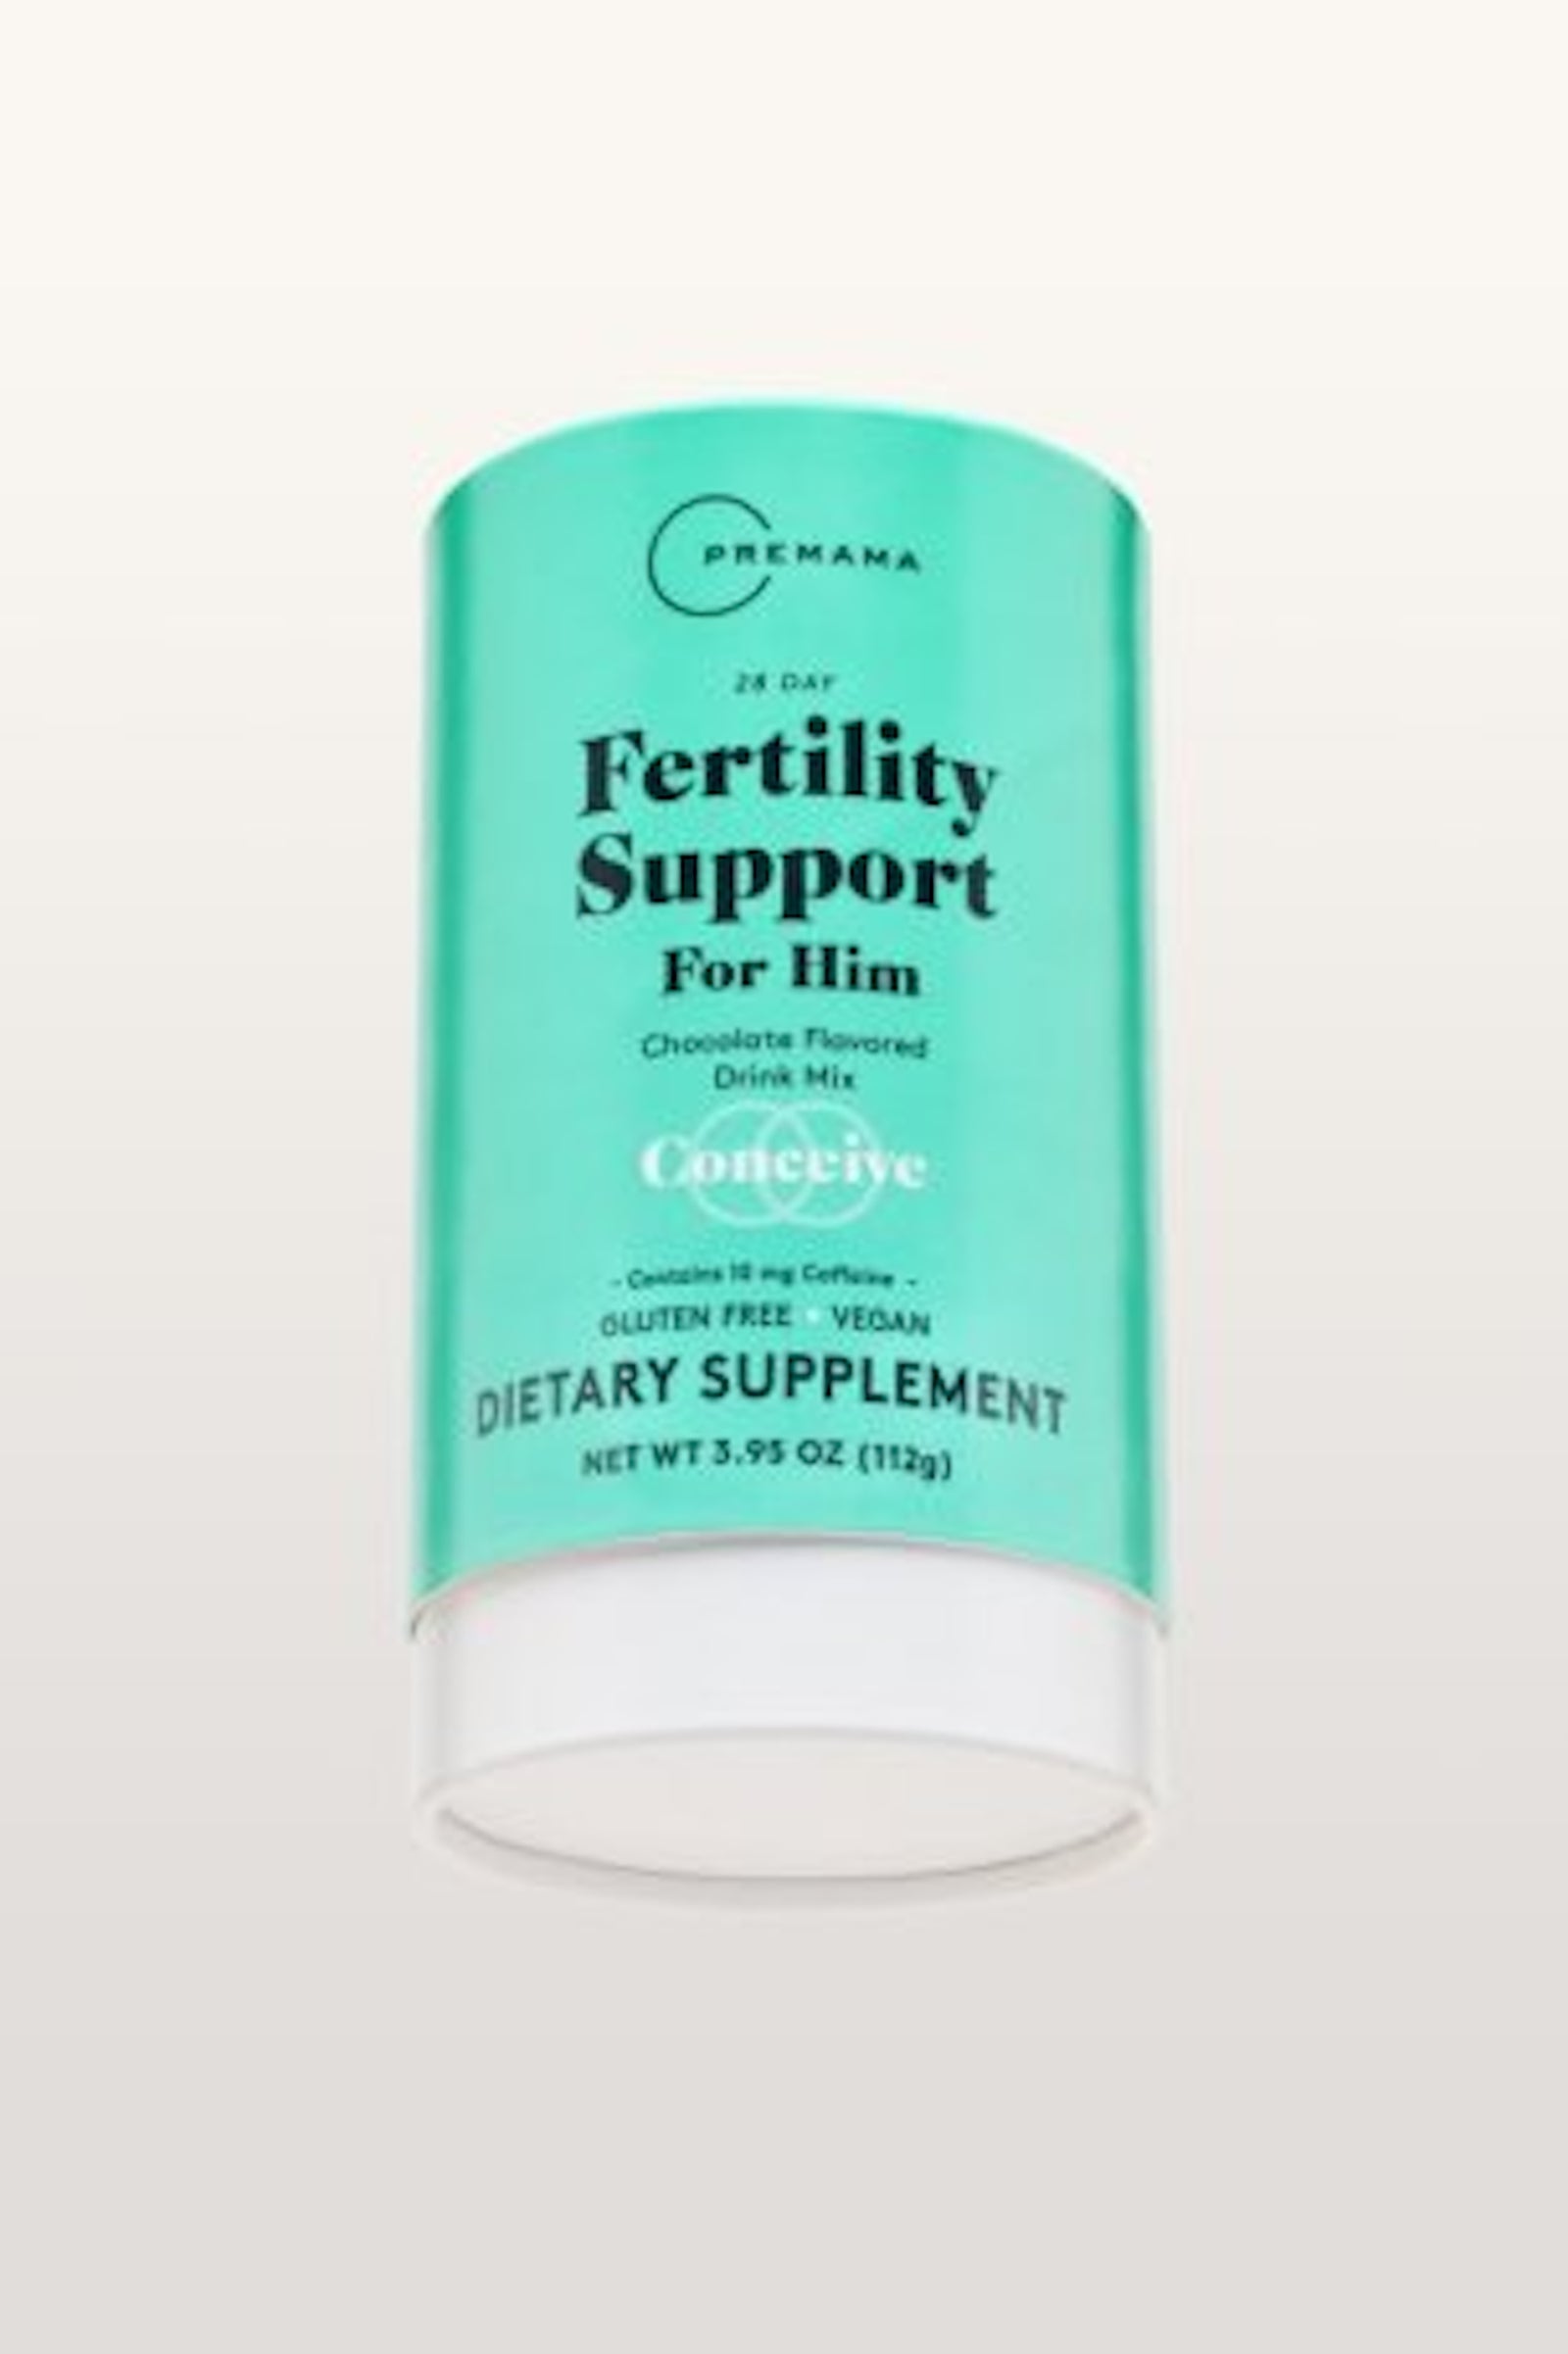 Fertility Support For Him